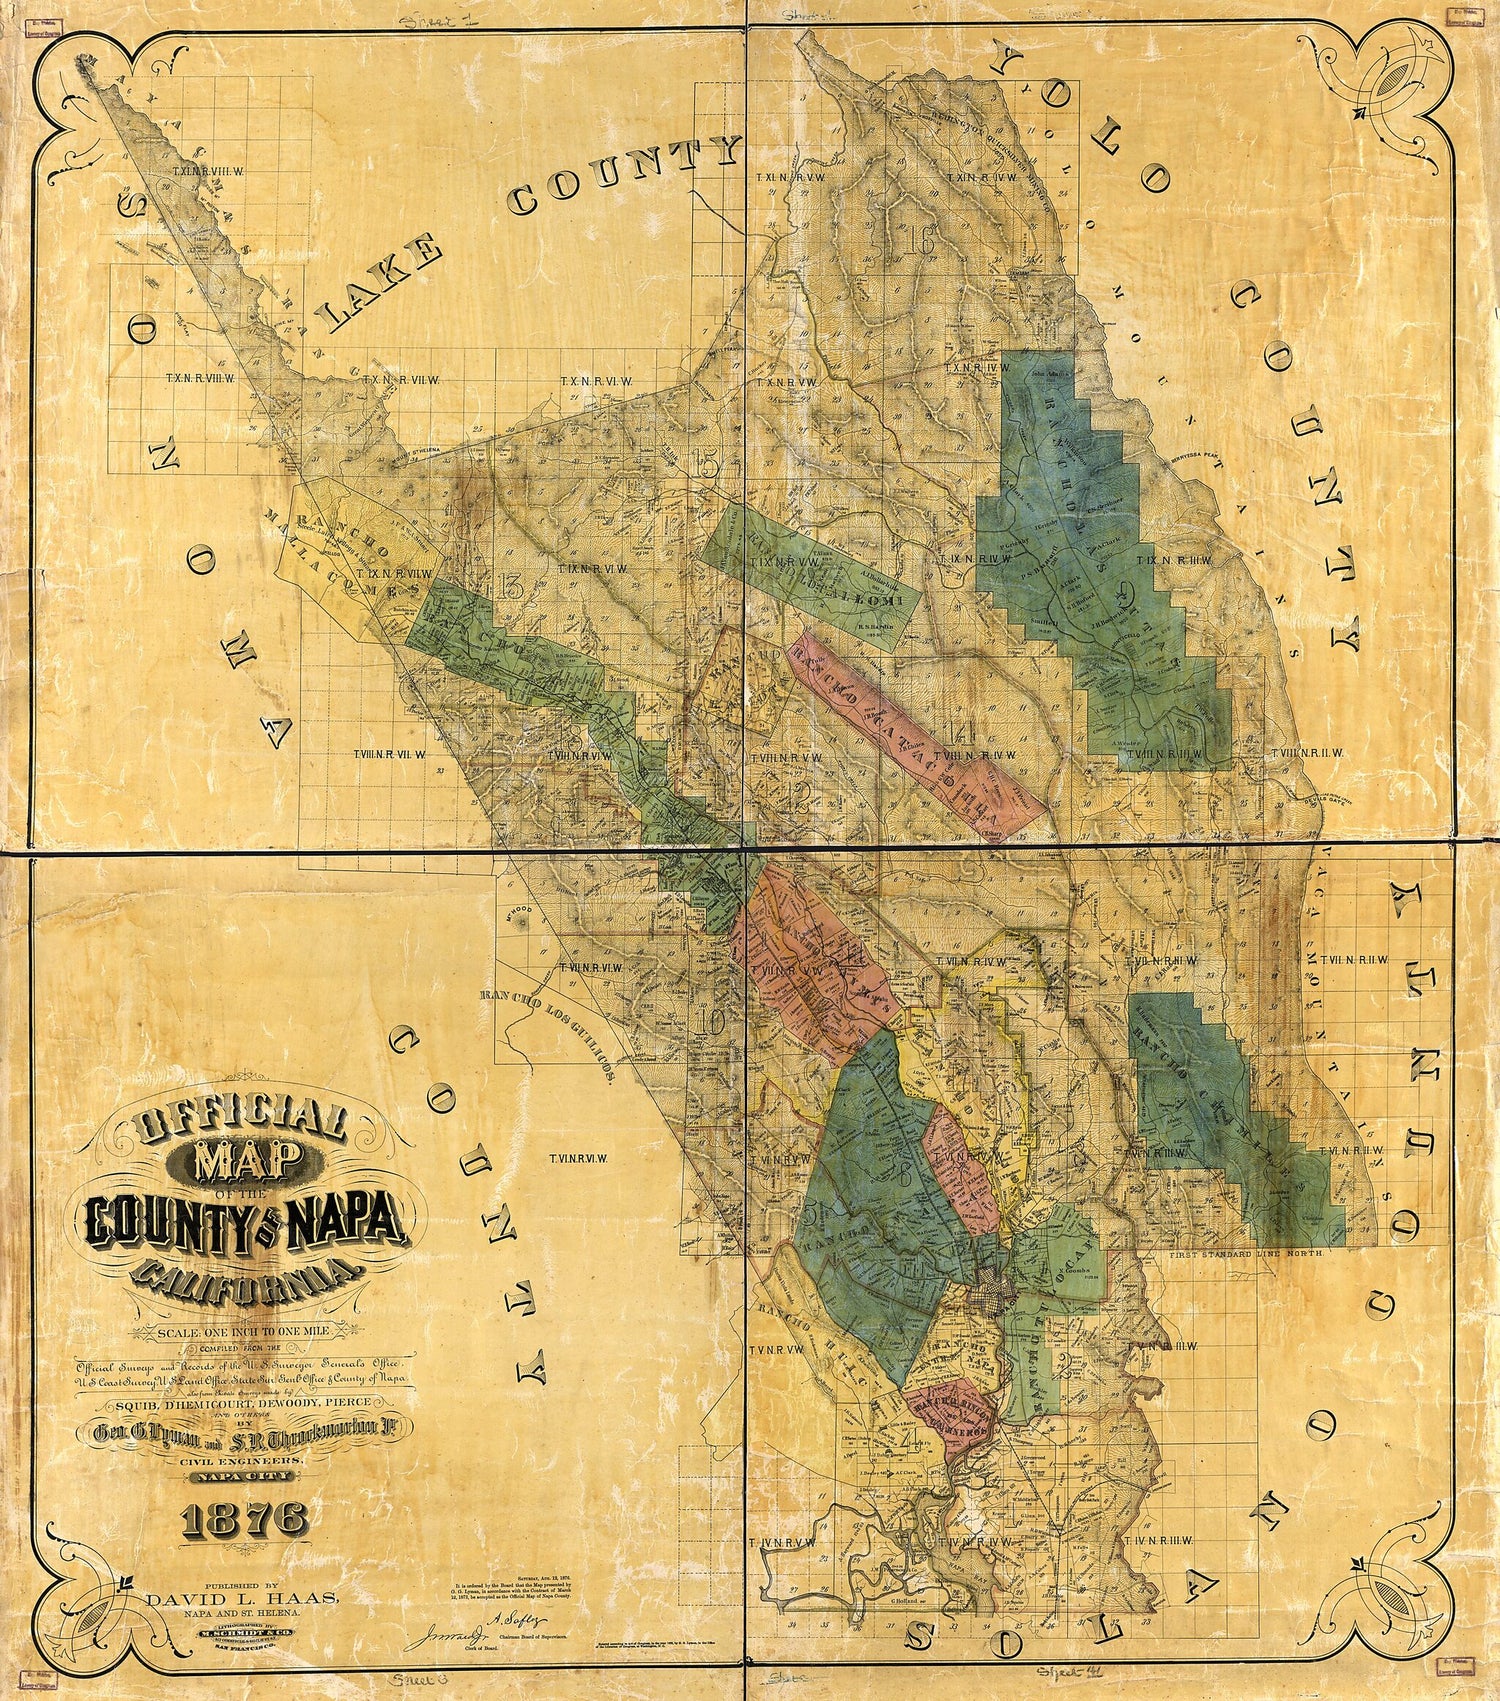 This old map of Official Map of the County of Napa, California  from 1876 was created by David L. Haas, Geo. G. Lyman,  M. Schmidt &amp; Co, S. R. Throckmorton in 1876